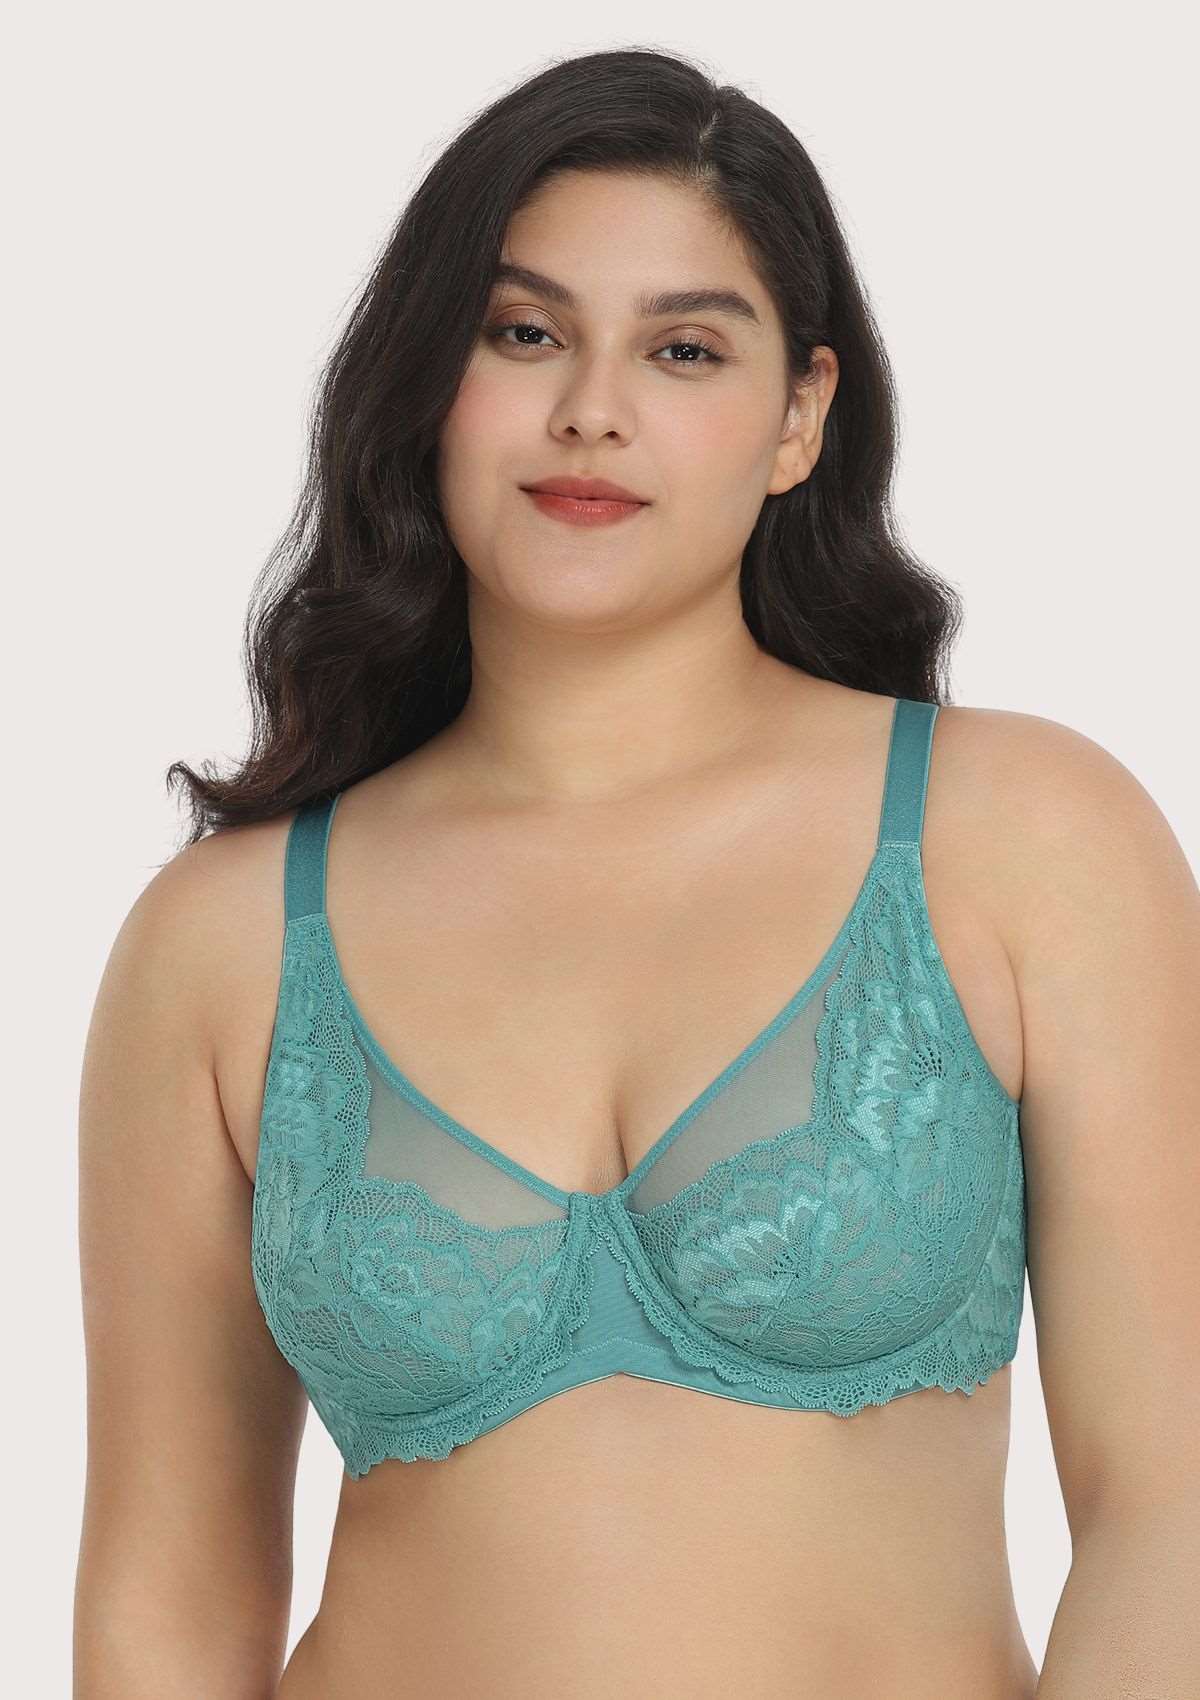 HSIA Paeonia Lace Full Coverage Underwire Non-Padded Uplifting Bra - Teal / 42 / DD/E